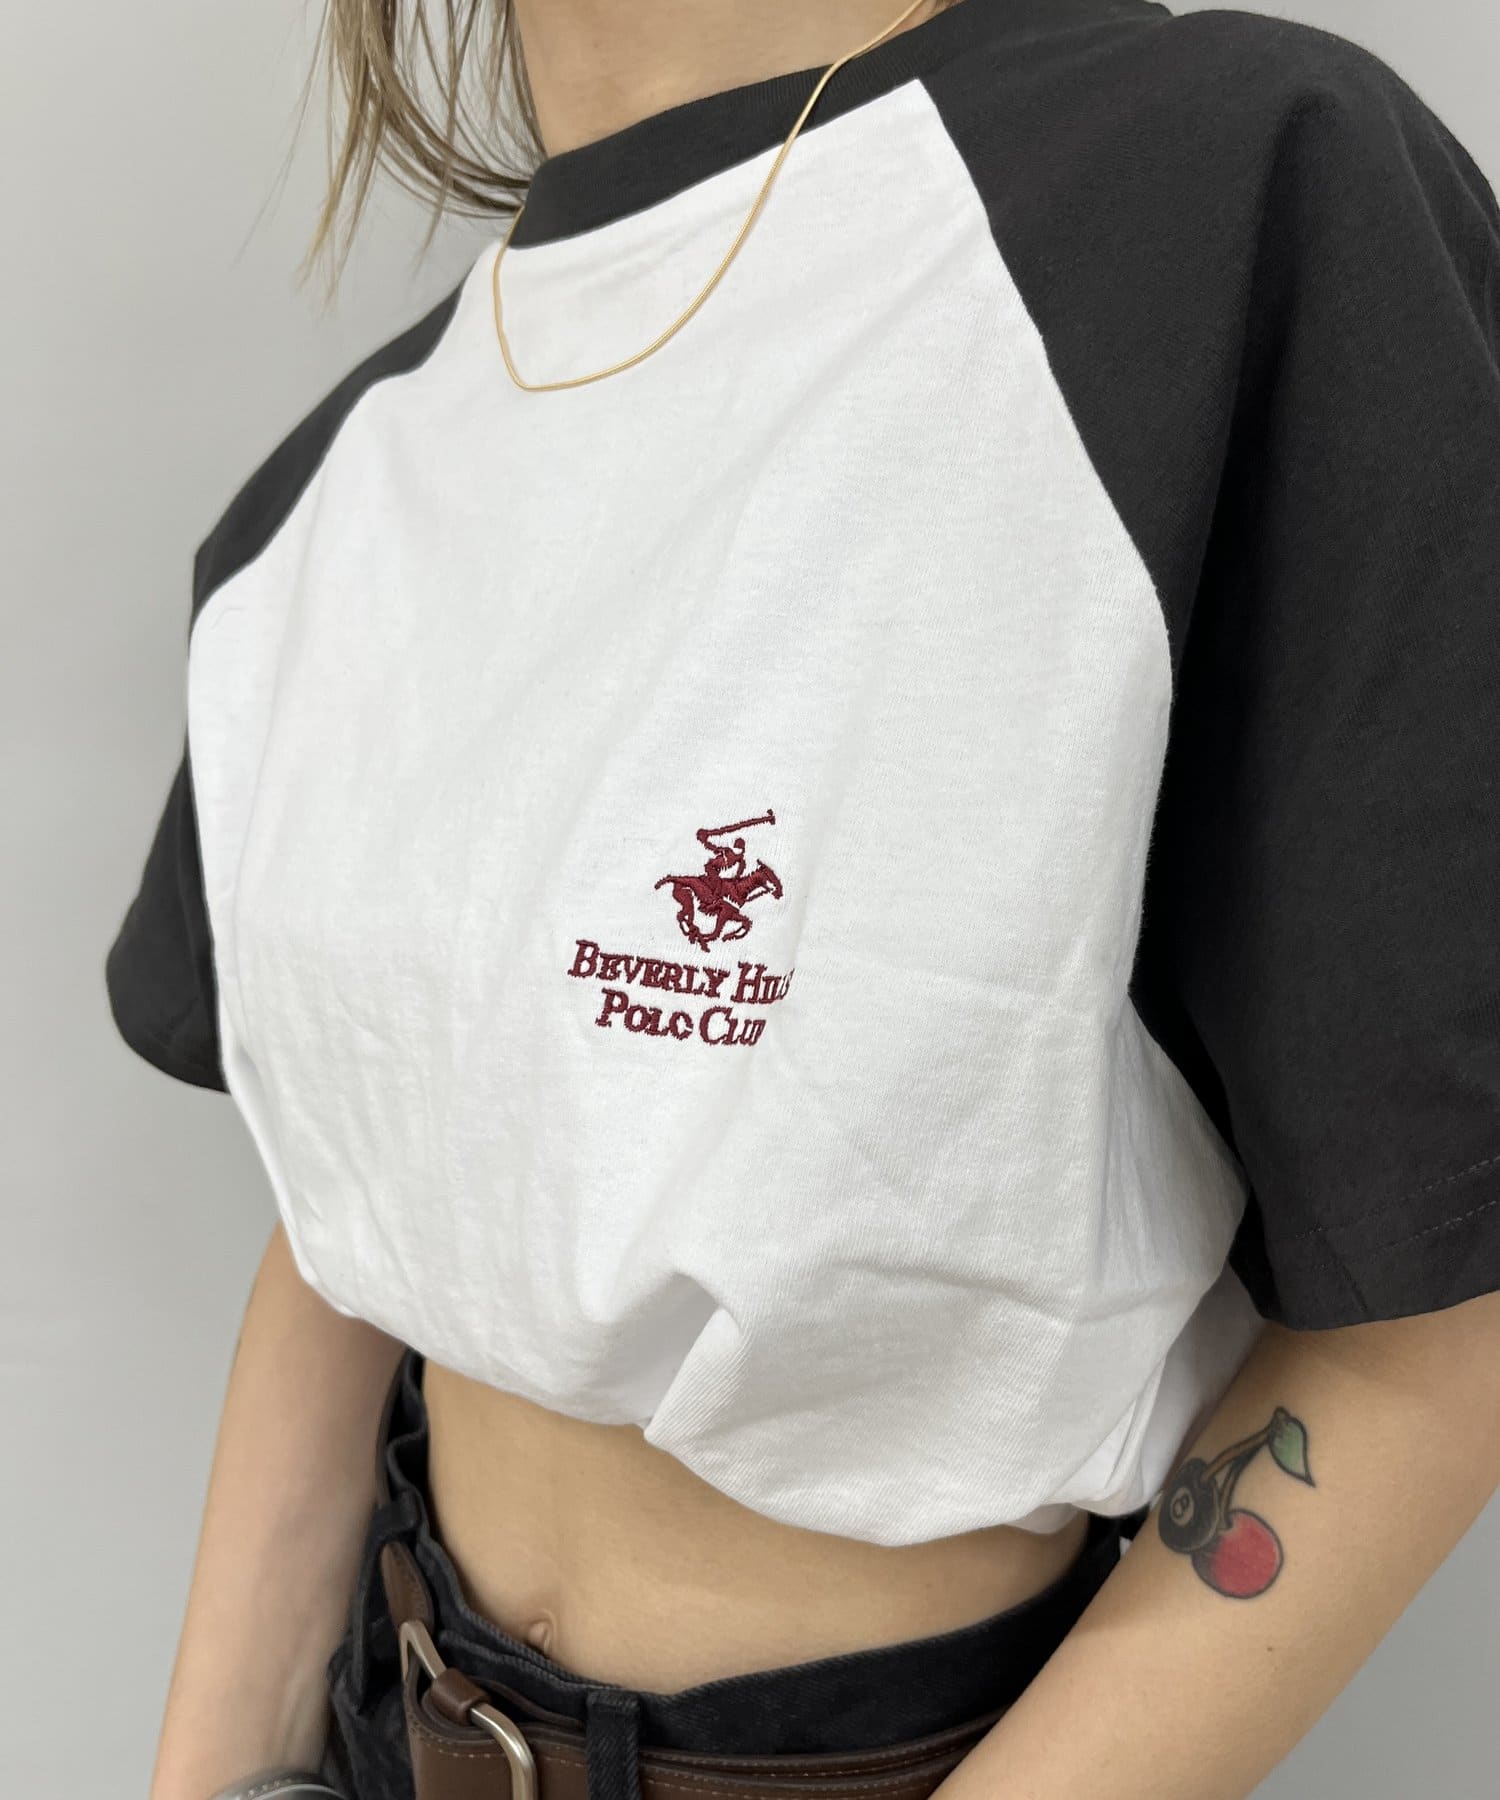 WHO’S WHO gallery(フーズフーギャラリー) BEVERLY HILLS POLO CLUBラグランTEE